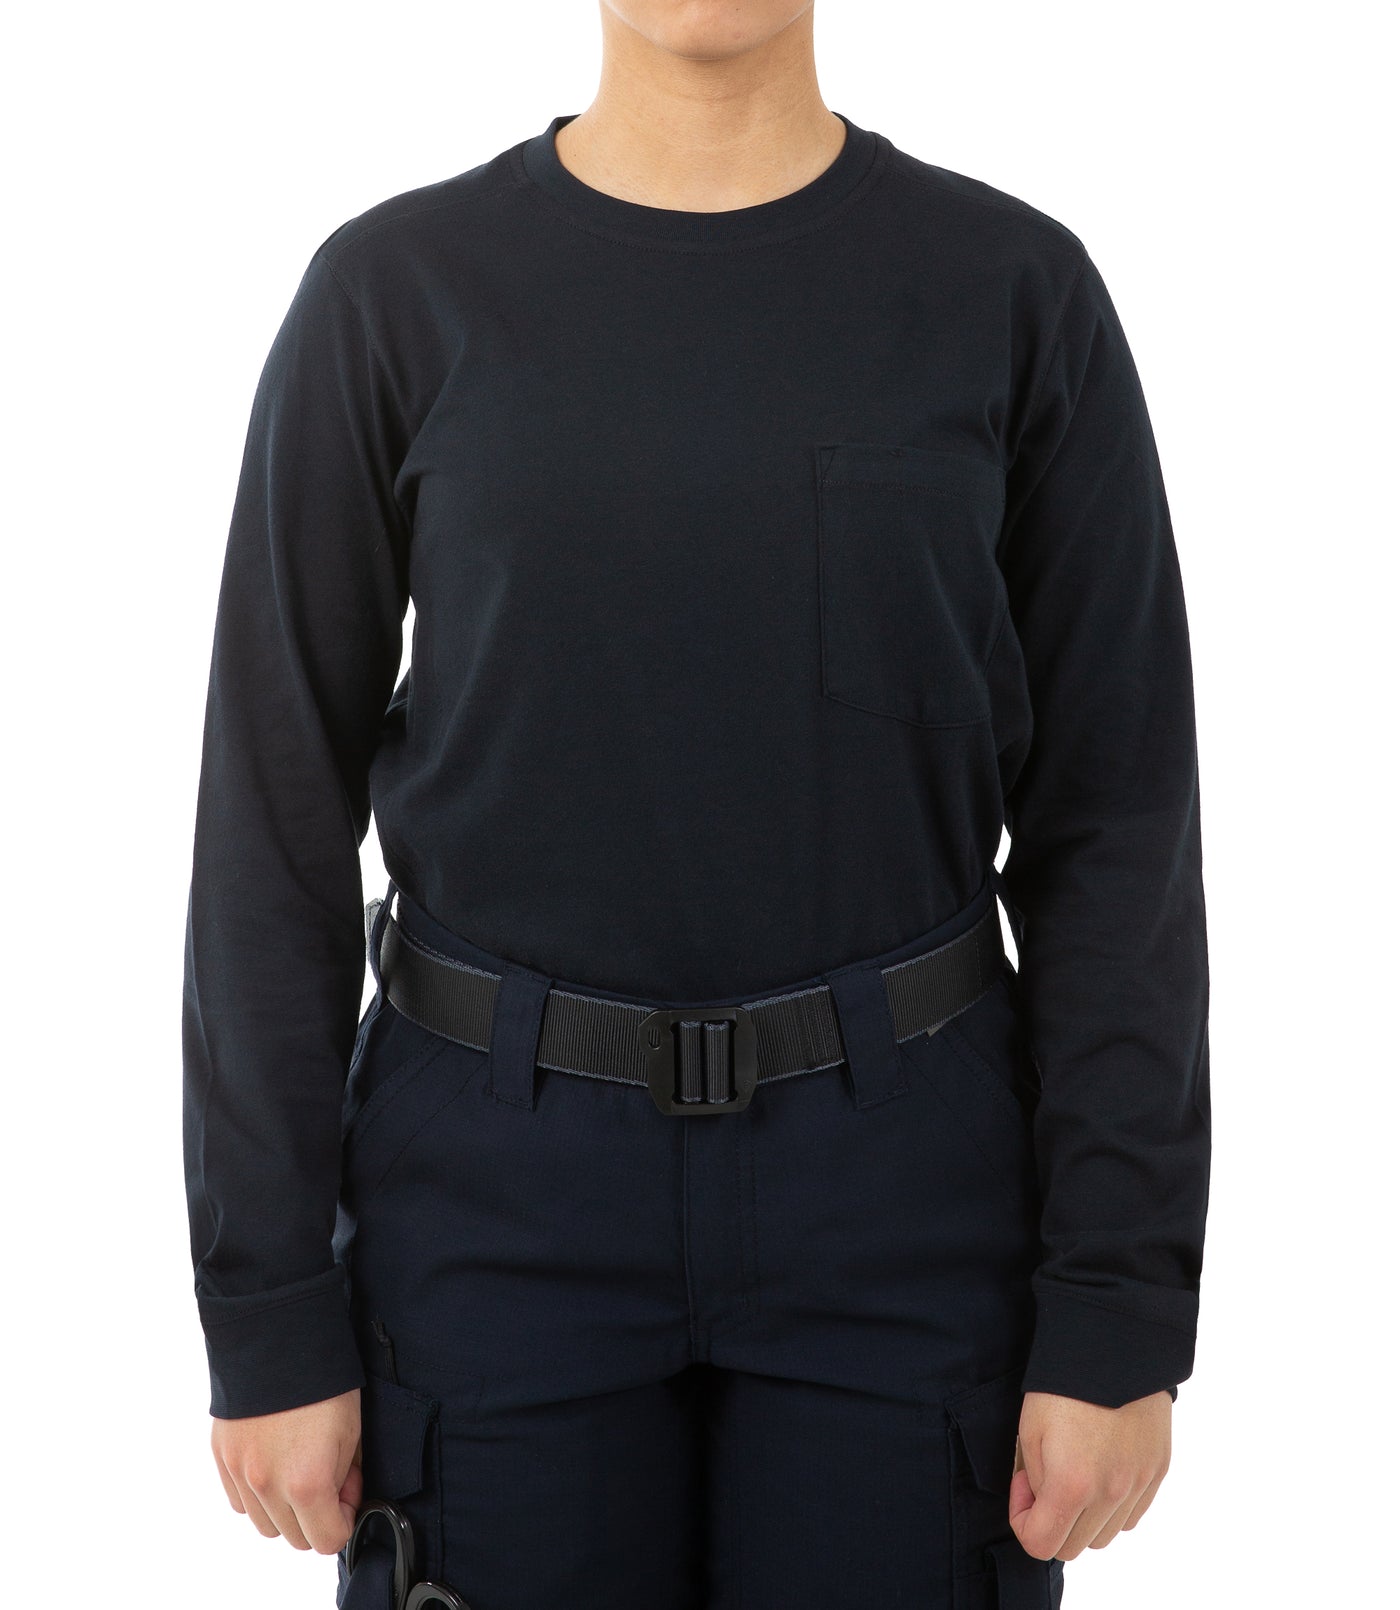 Women's Tactix Cotton Long Sleeve T-Shirt with Chest Pocket